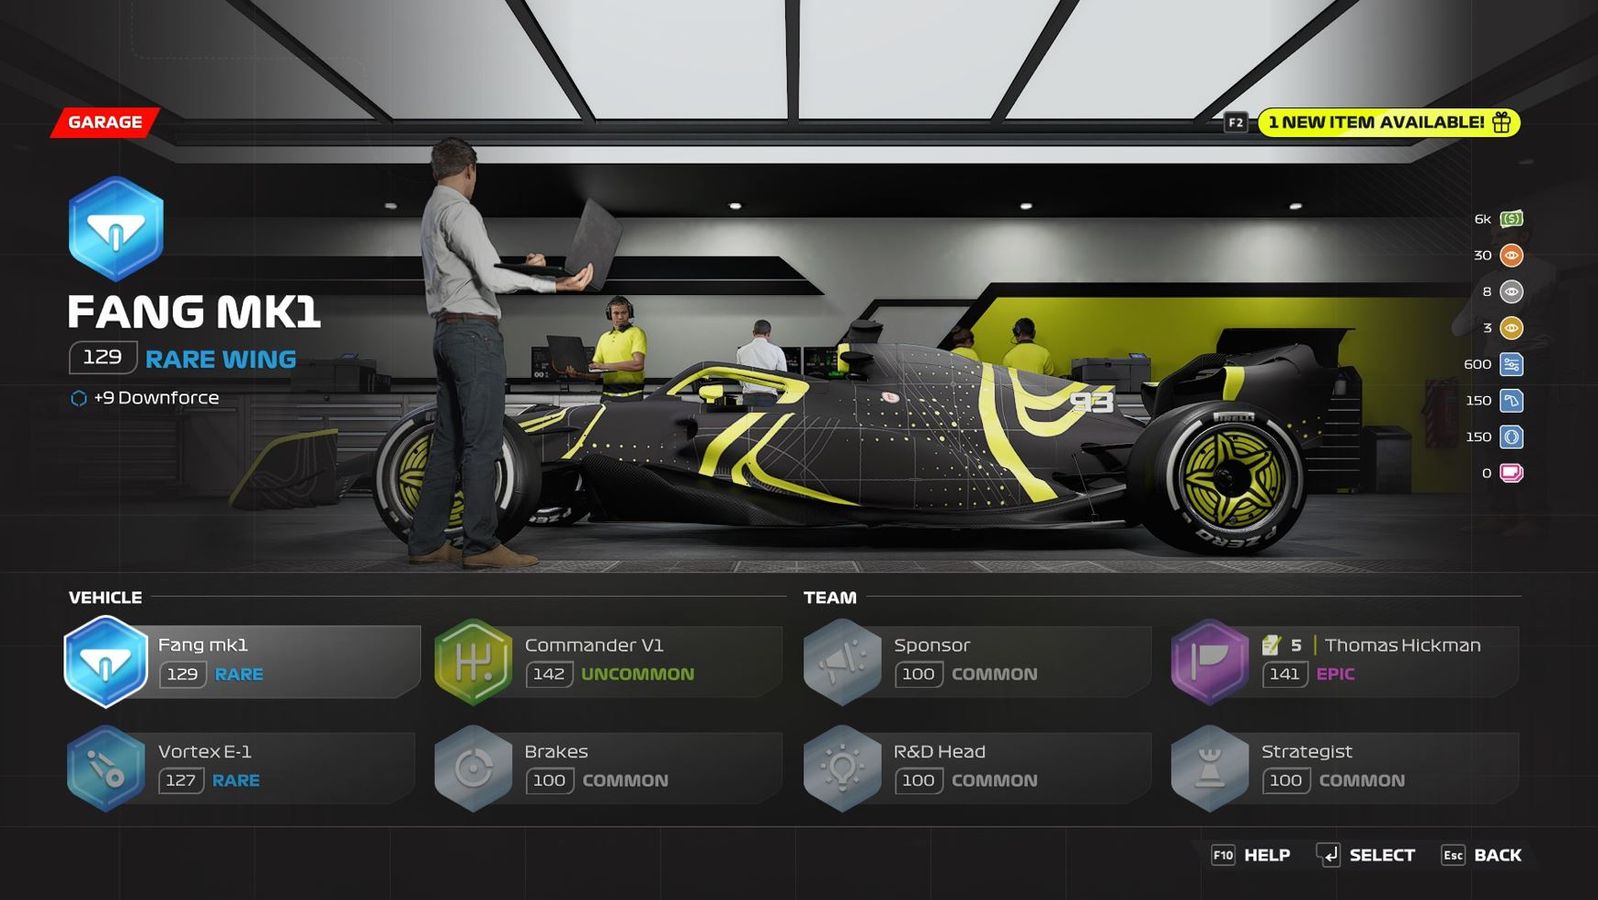 The F1 World garage showing your upgrades in F1 23